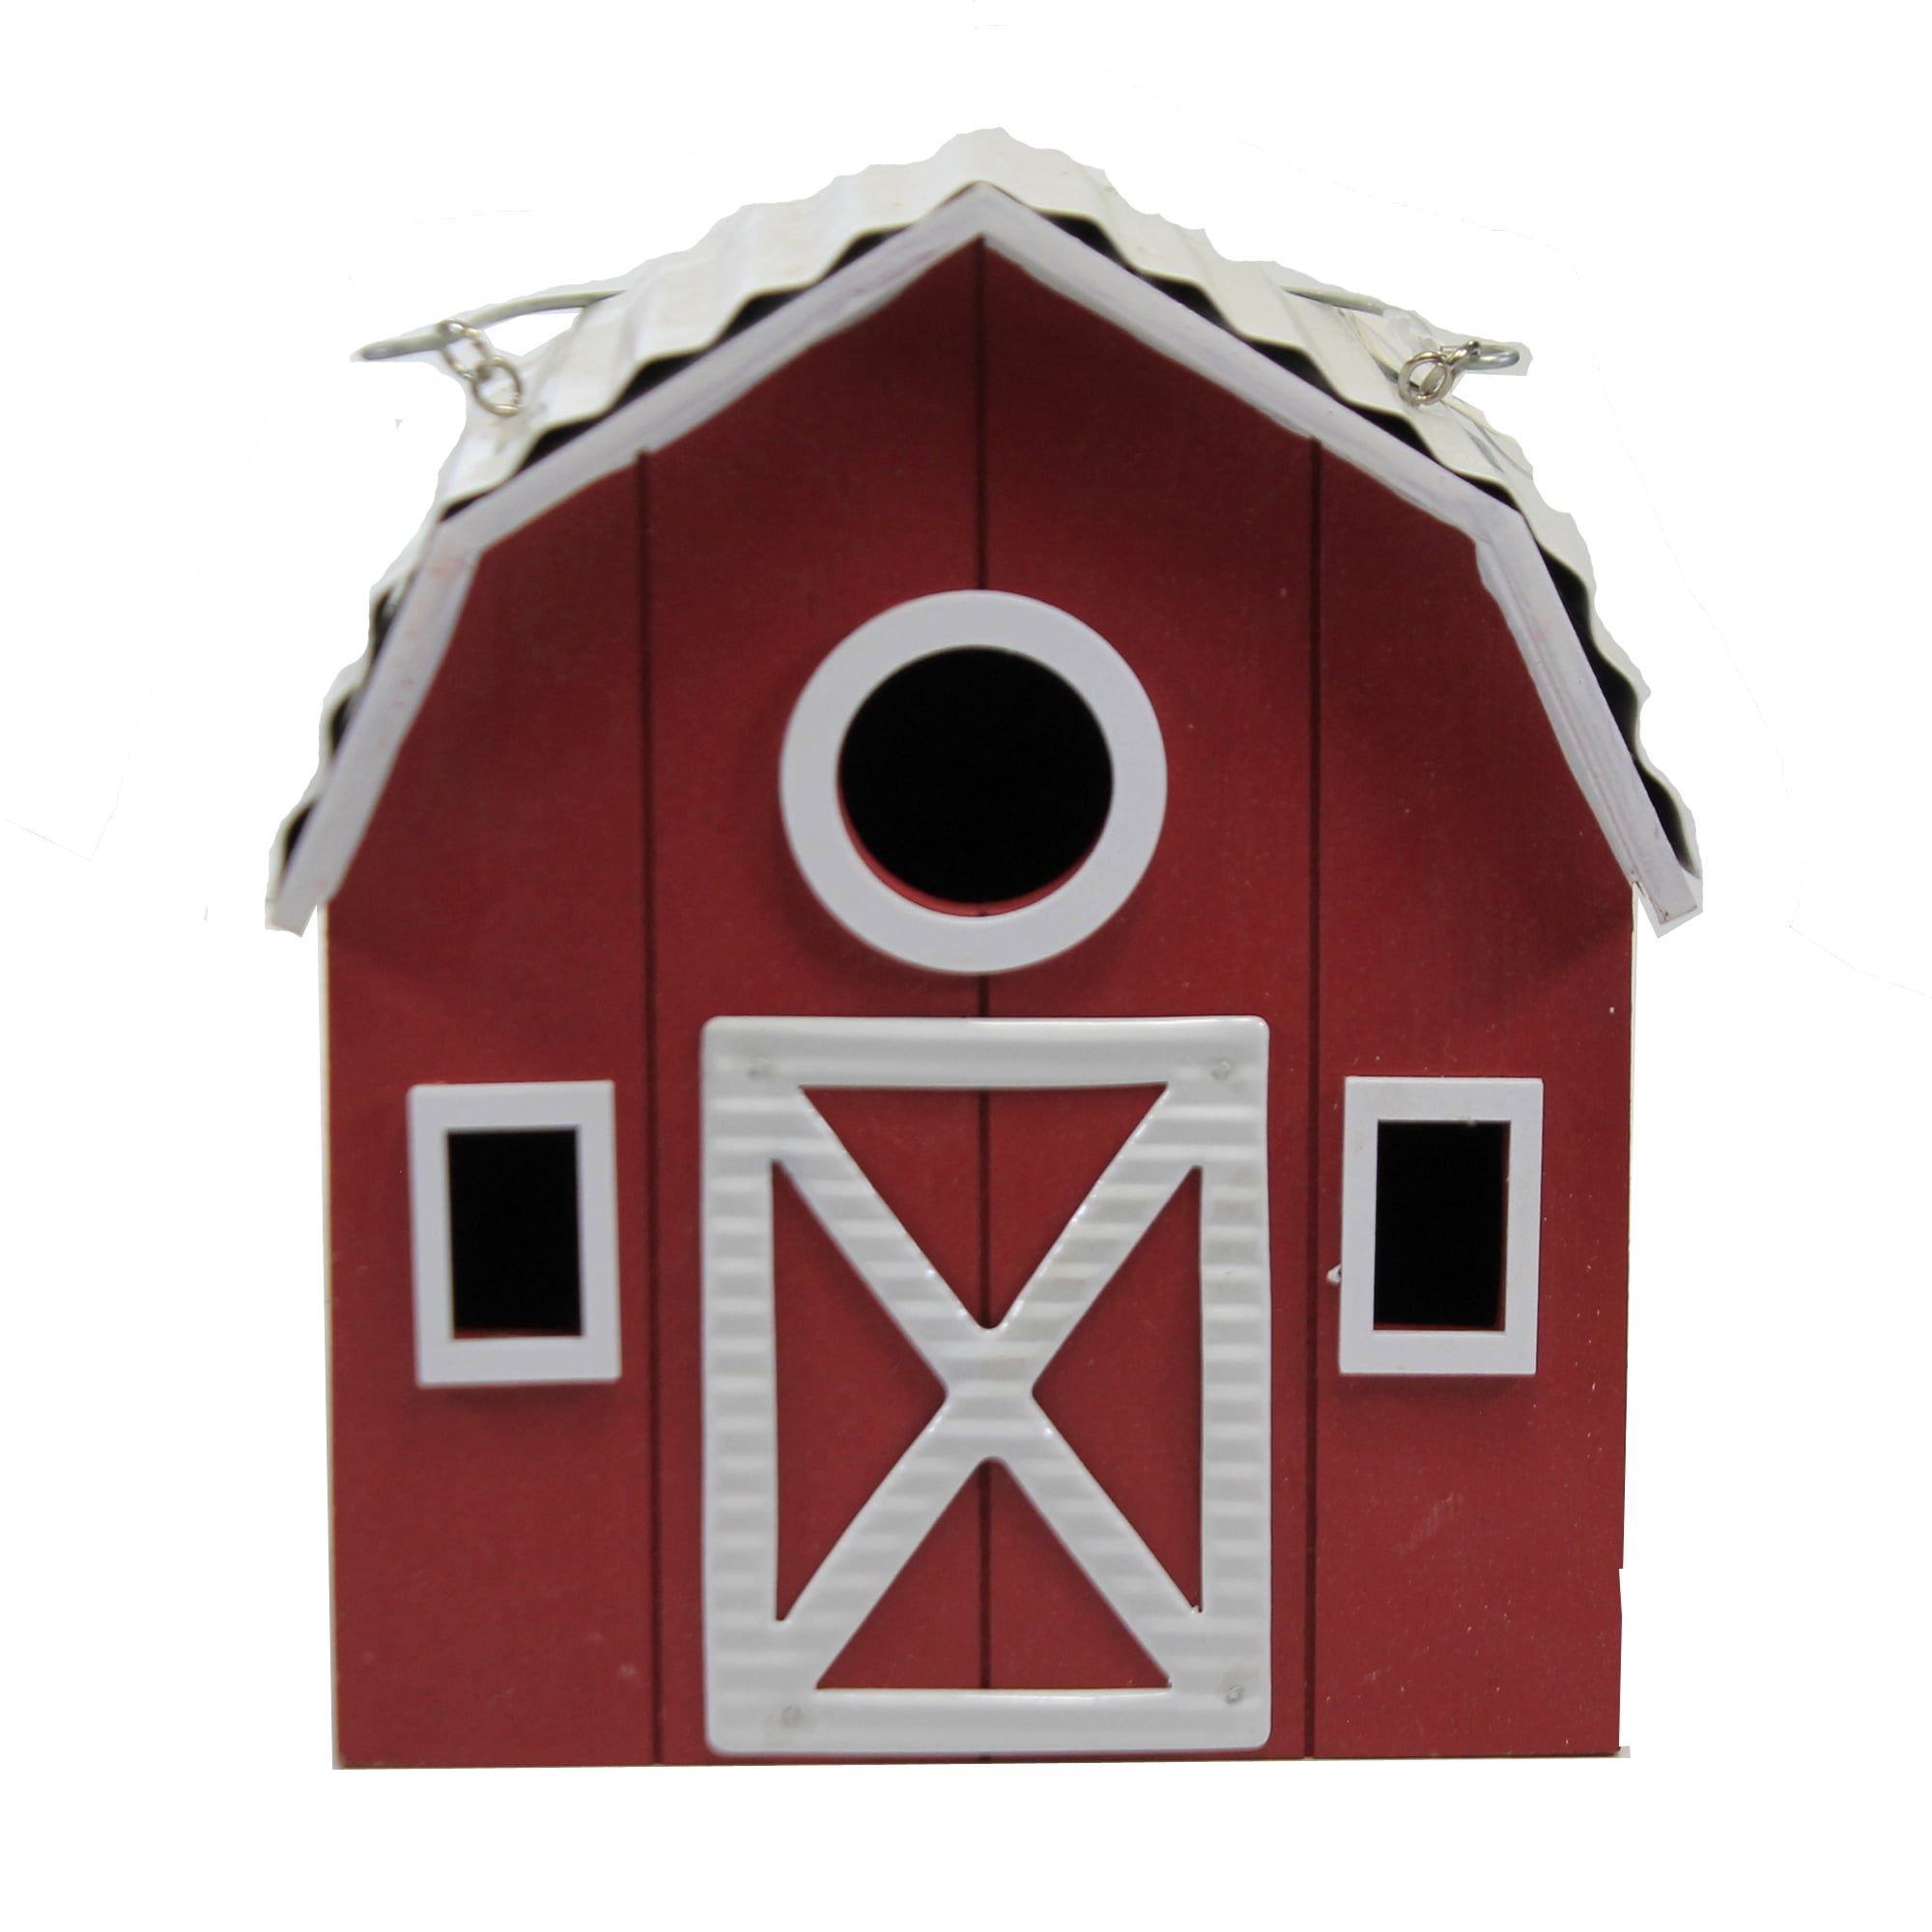 Birdhouse Patriotic Wooden Red White Stripes Patterned Tin Roof Star Opening New 